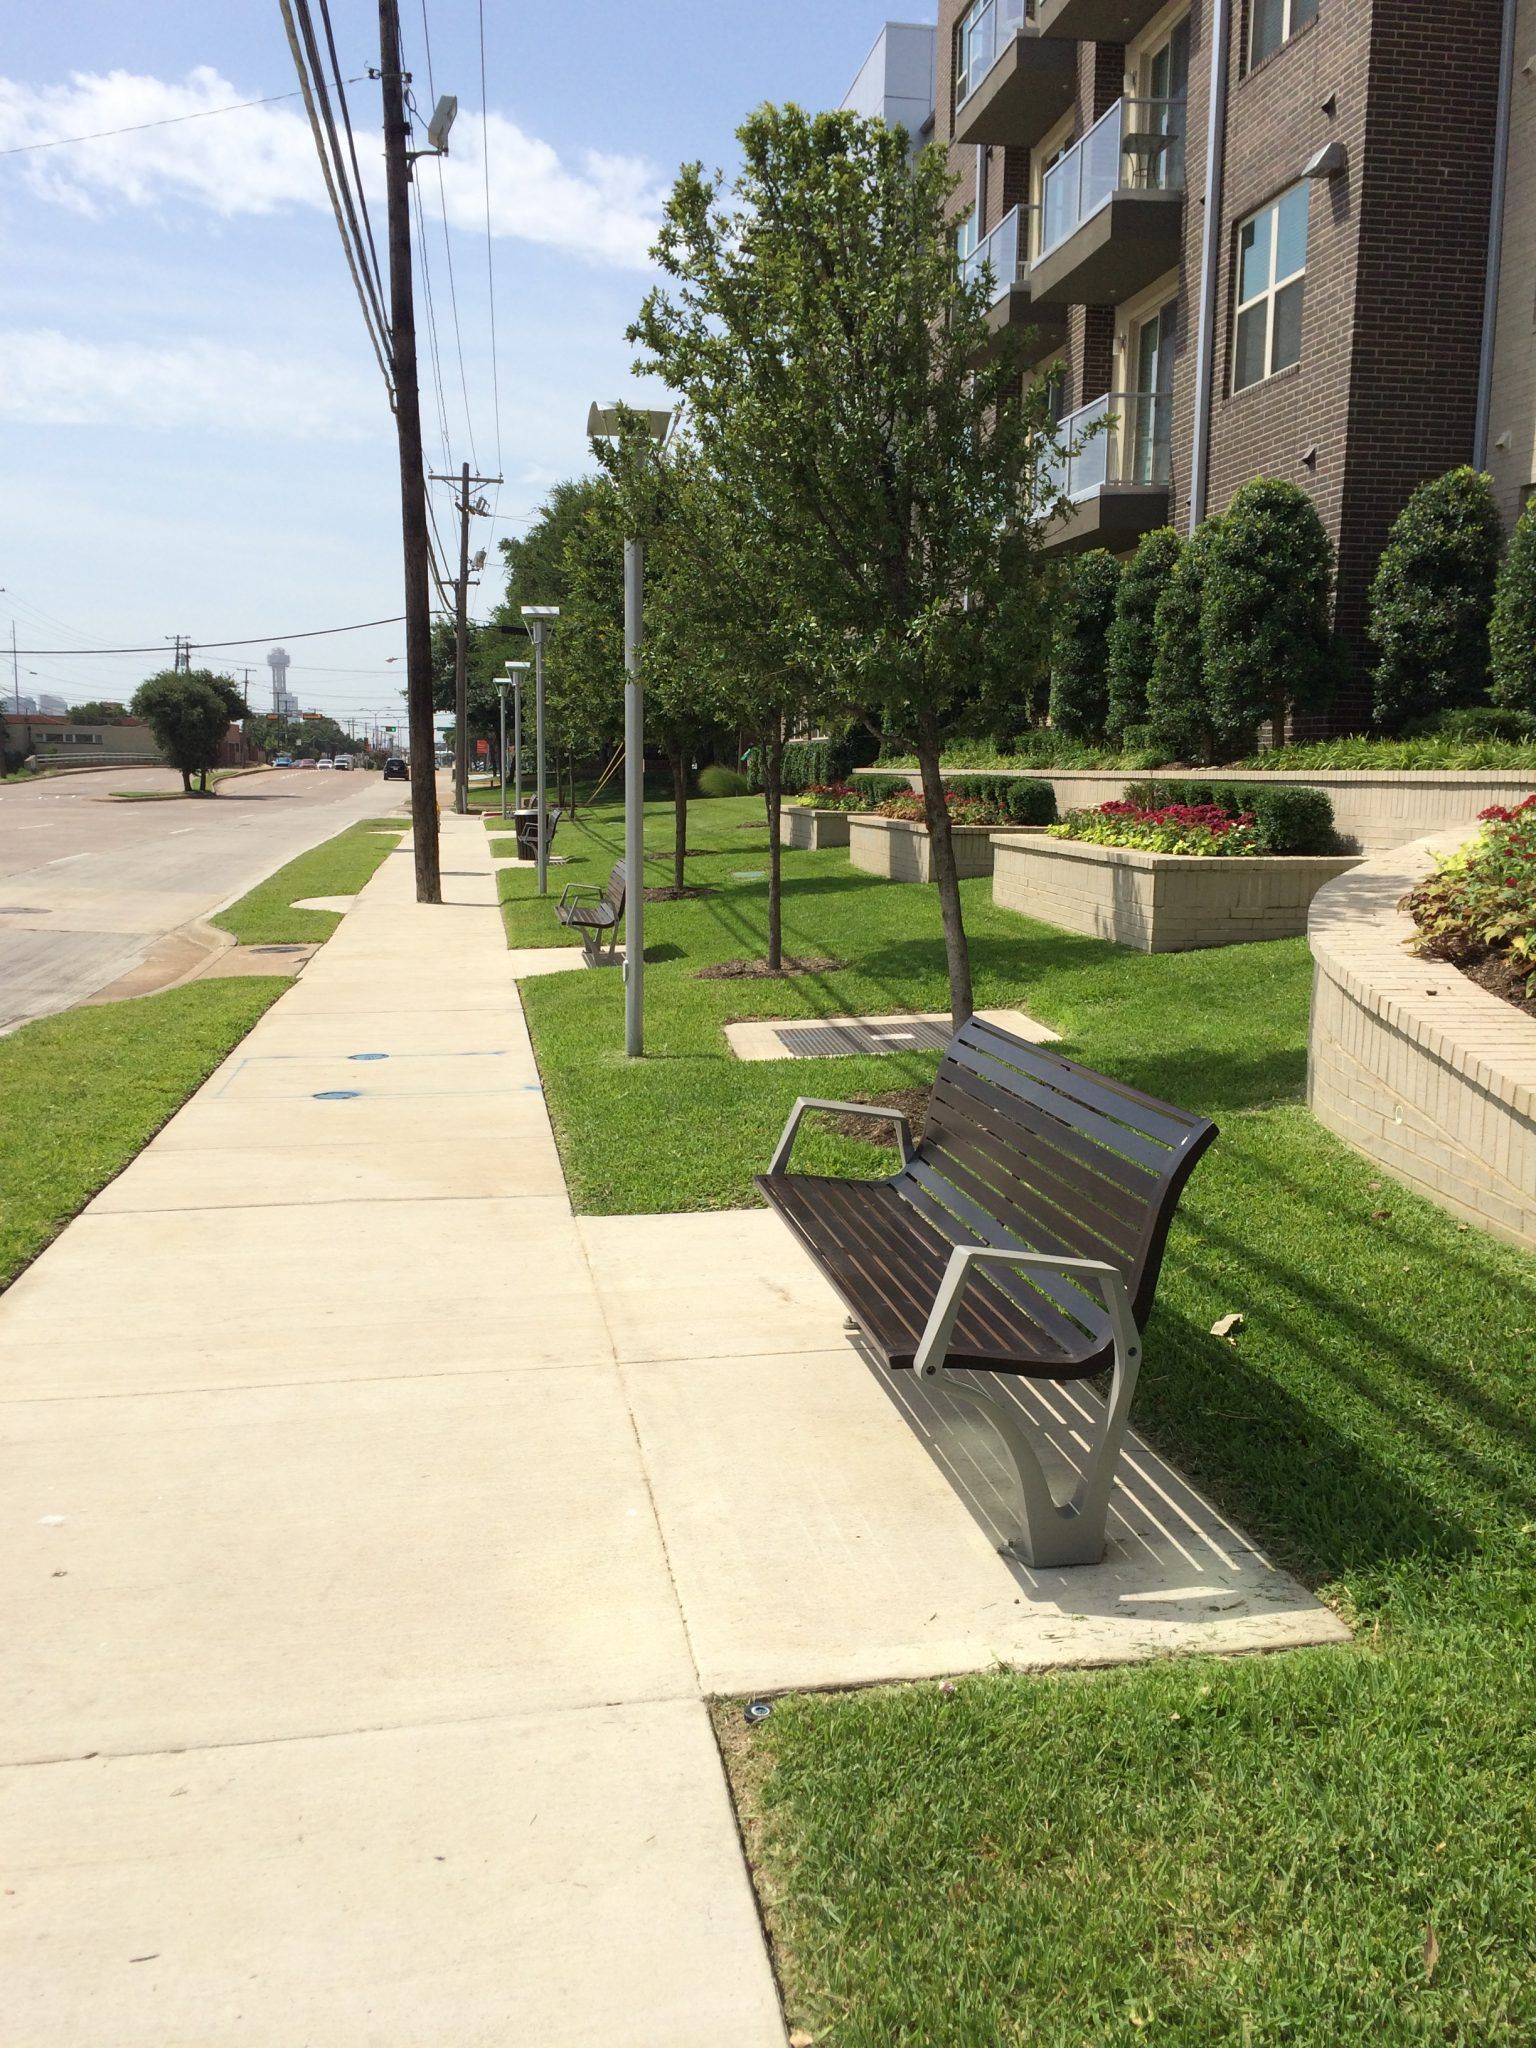 A sidewalk with a row of benches along a street in front of an apartment building.